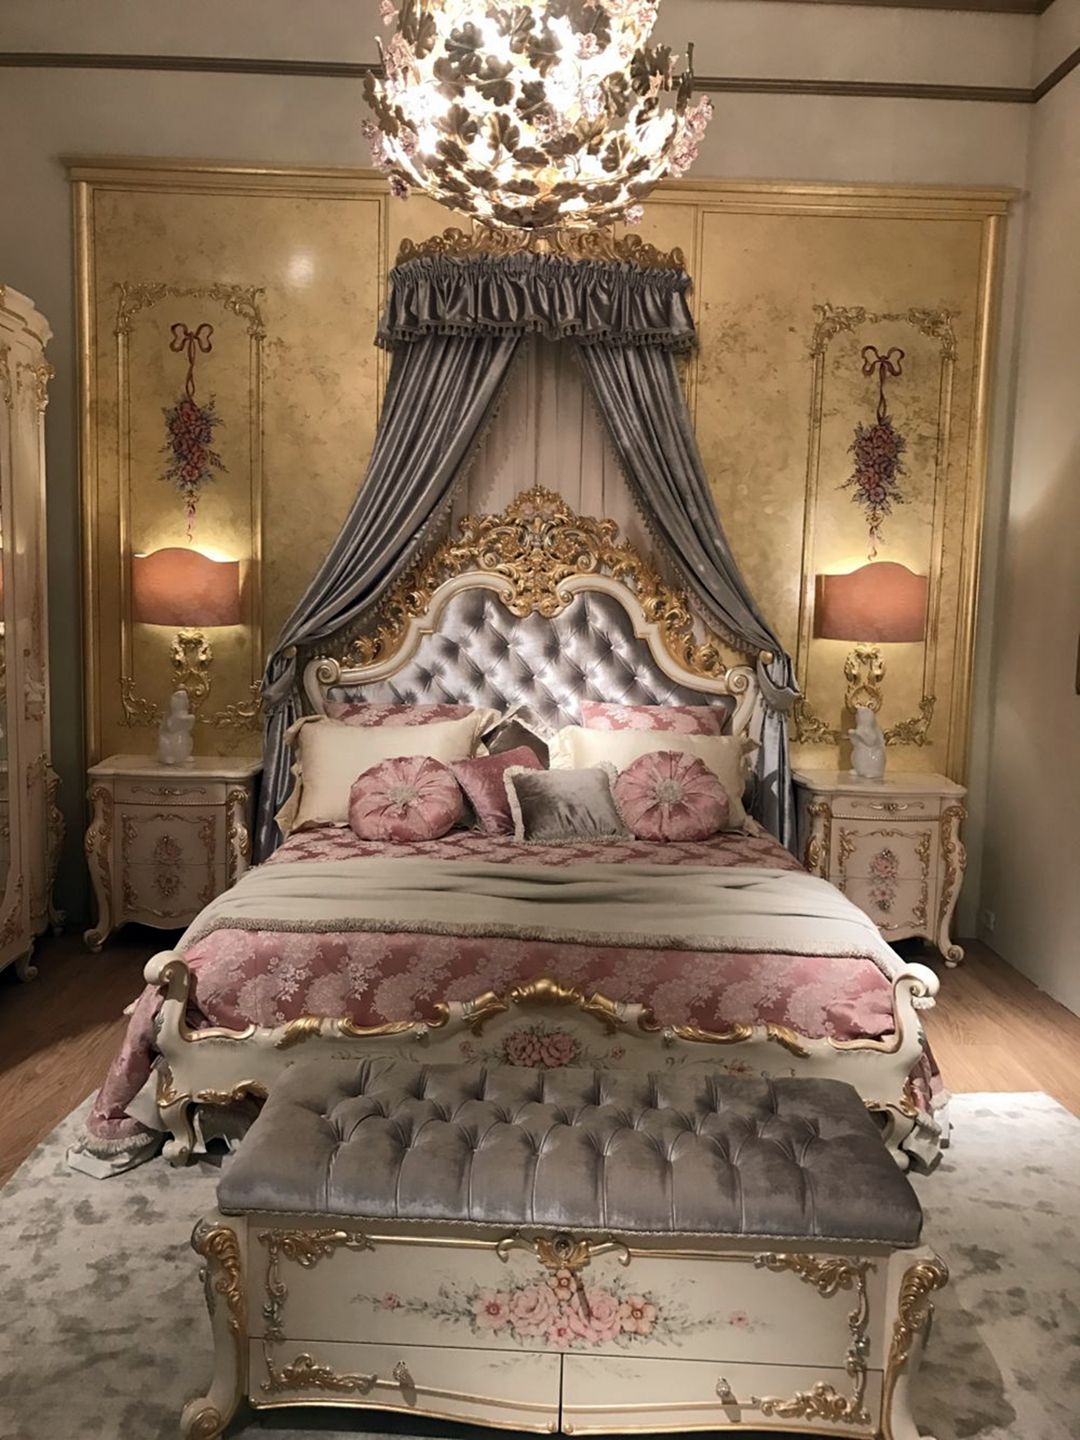 Decorating A Princess Bedroom With Baroque Beds And Tufted Bed From Homedit